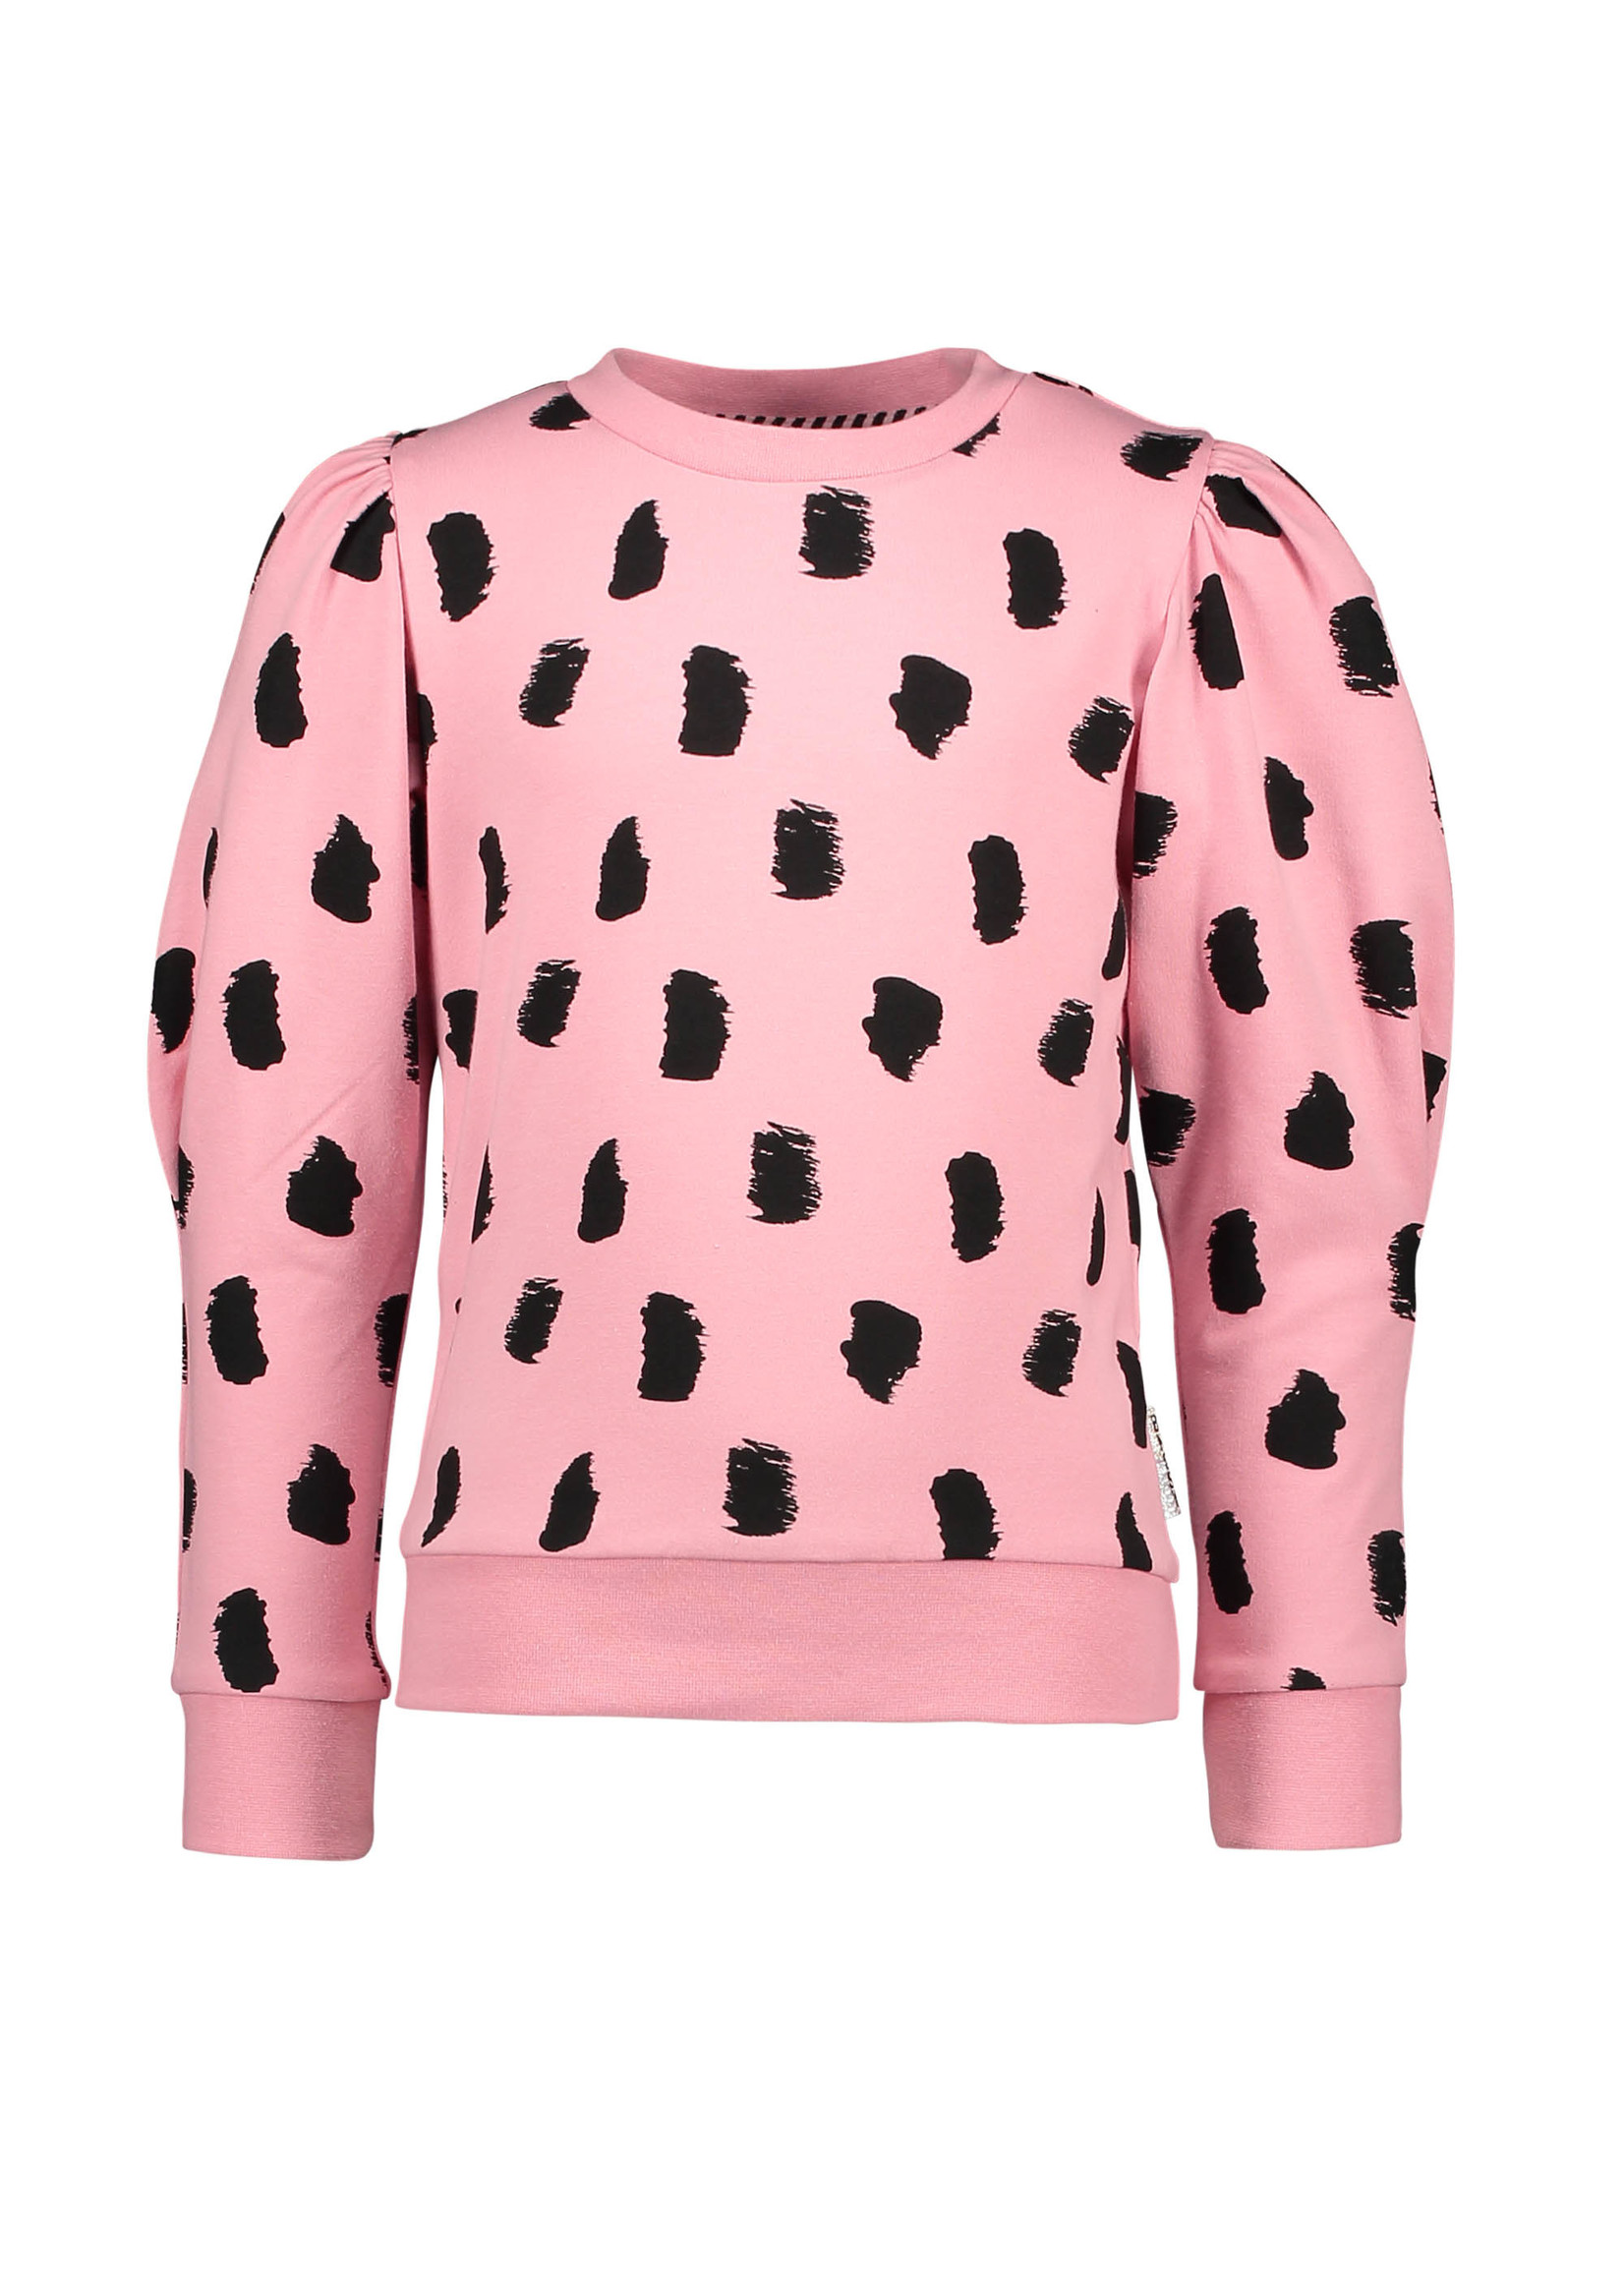 B-Nosy Girls sweater with punch paint ao, punch paint